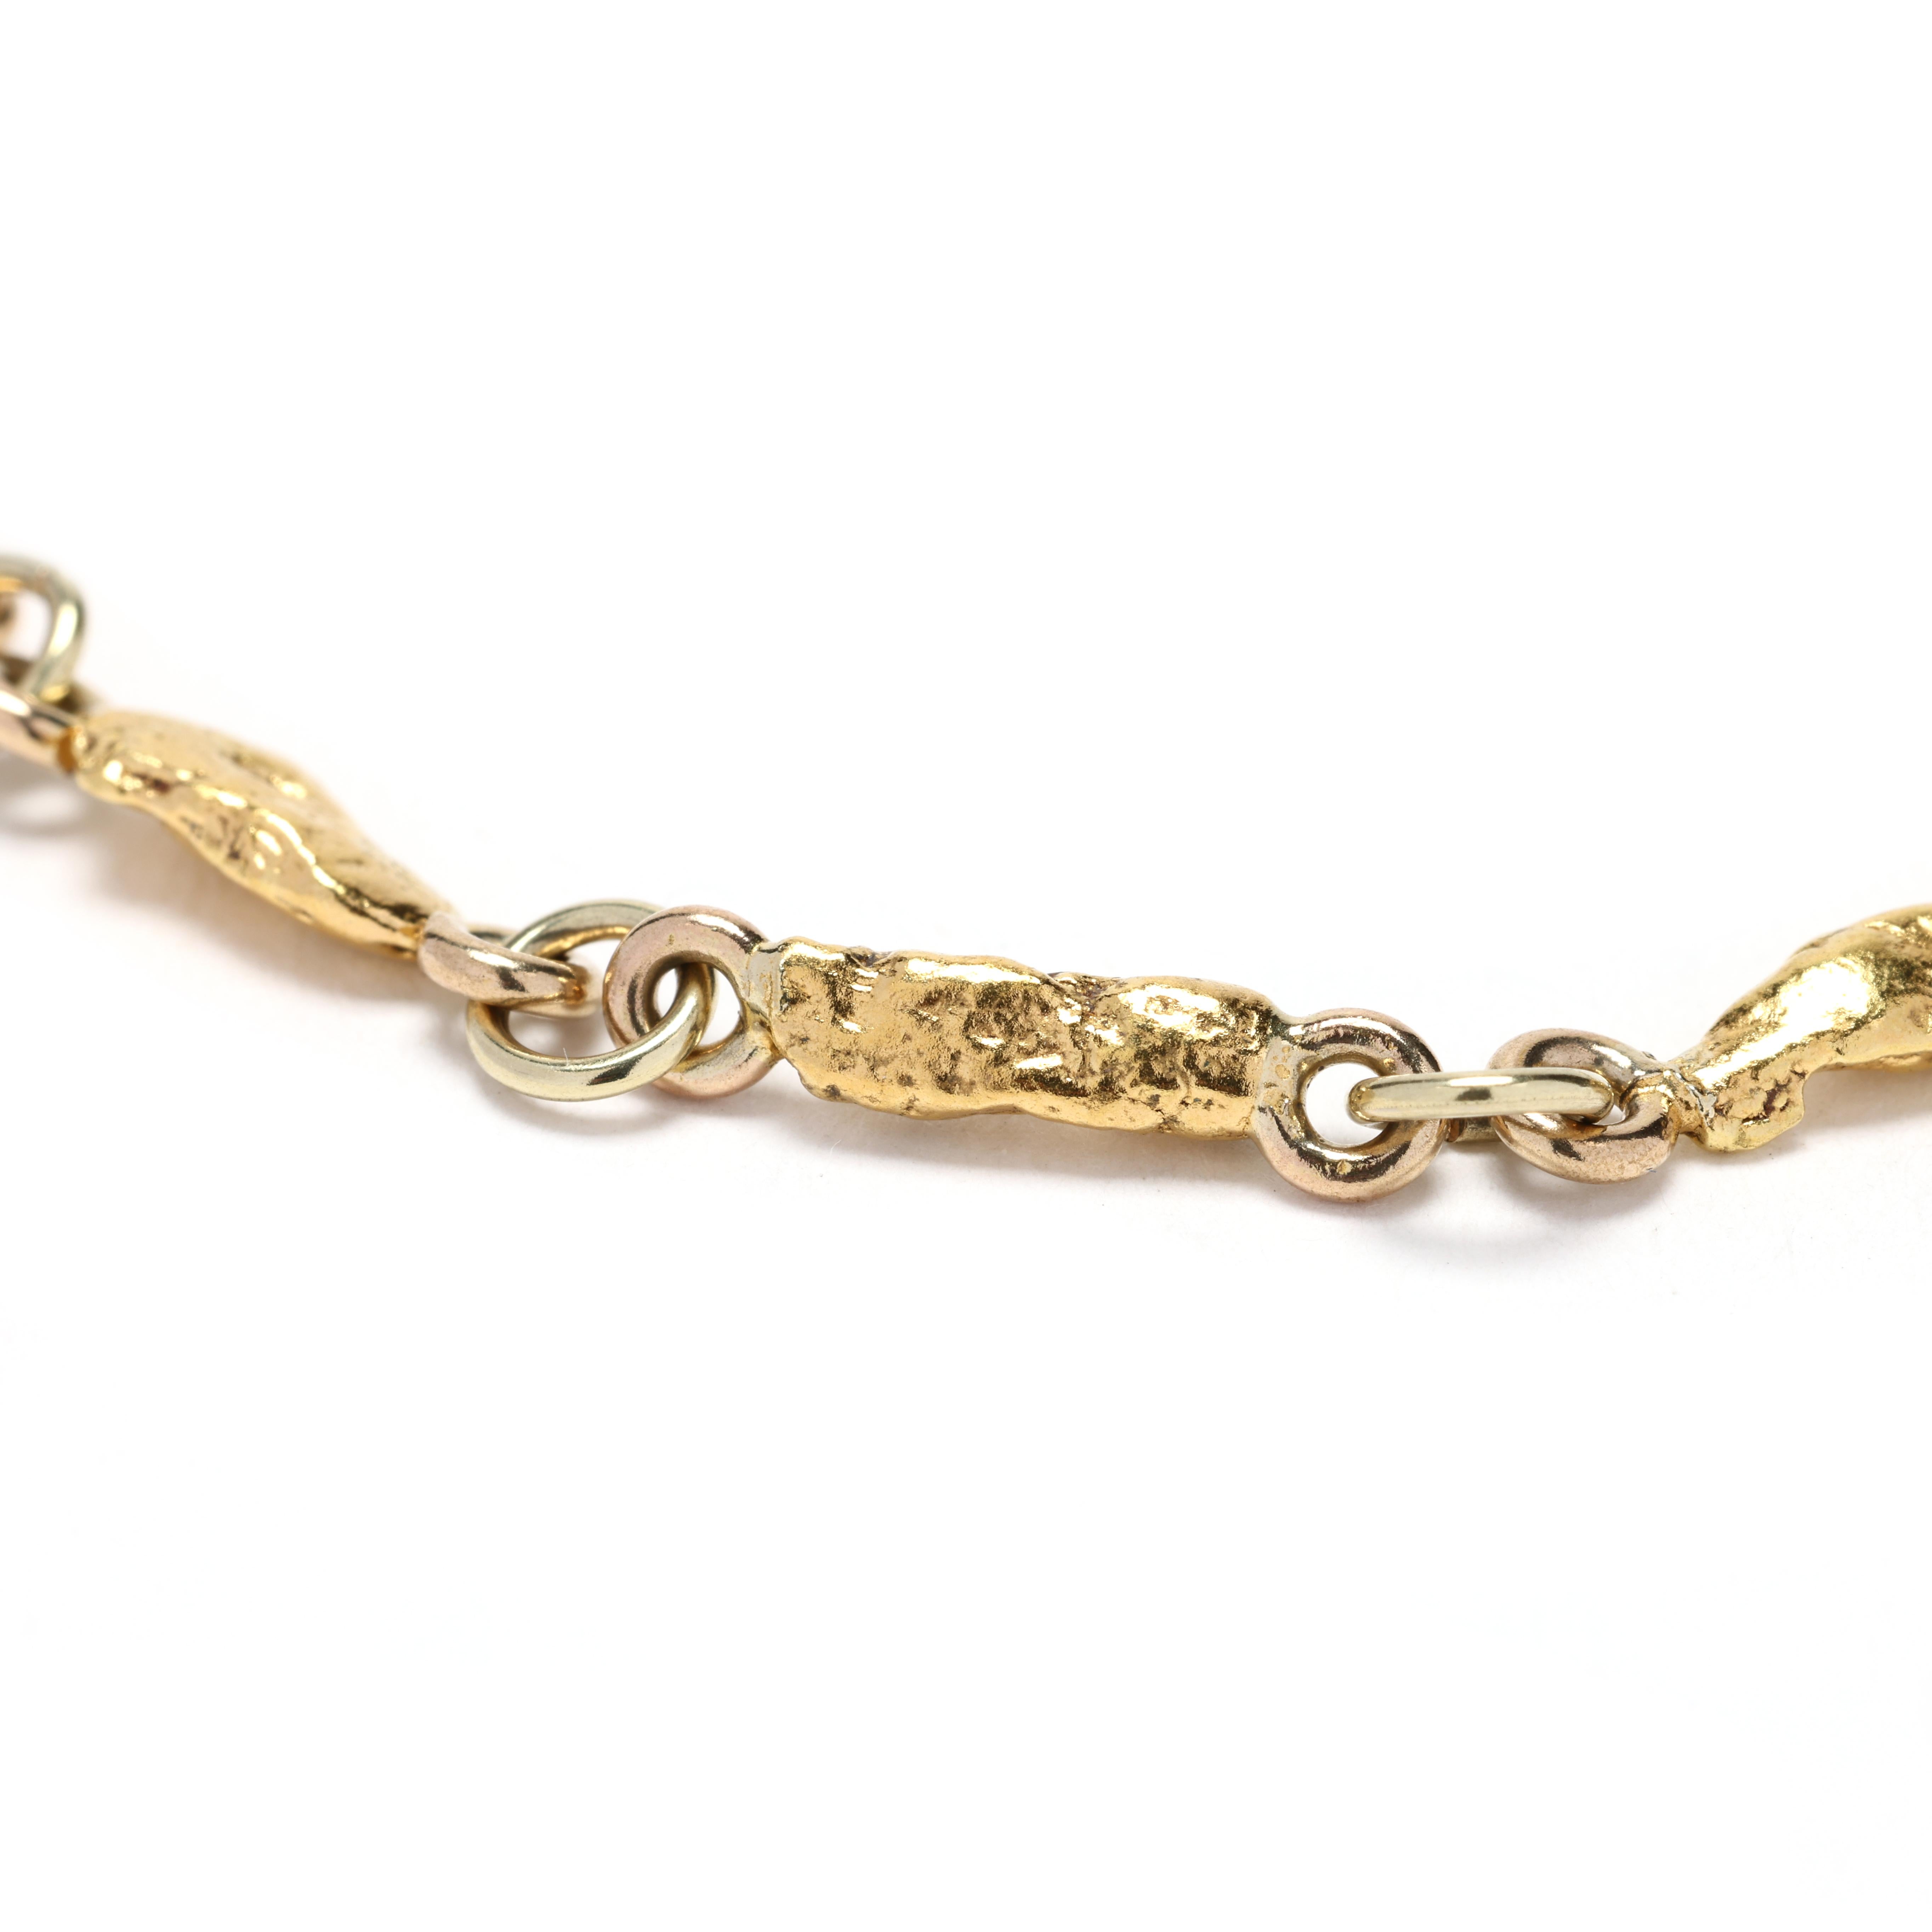 Embrace the allure of luxury with this stunning 22k Gold Nugget Bracelet. Featuring genuine gold nuggets set on an 18k yellow gold chain, this bracelet exudes elegance and sophistication, adding a touch of opulence to any ensemble. Perfect for